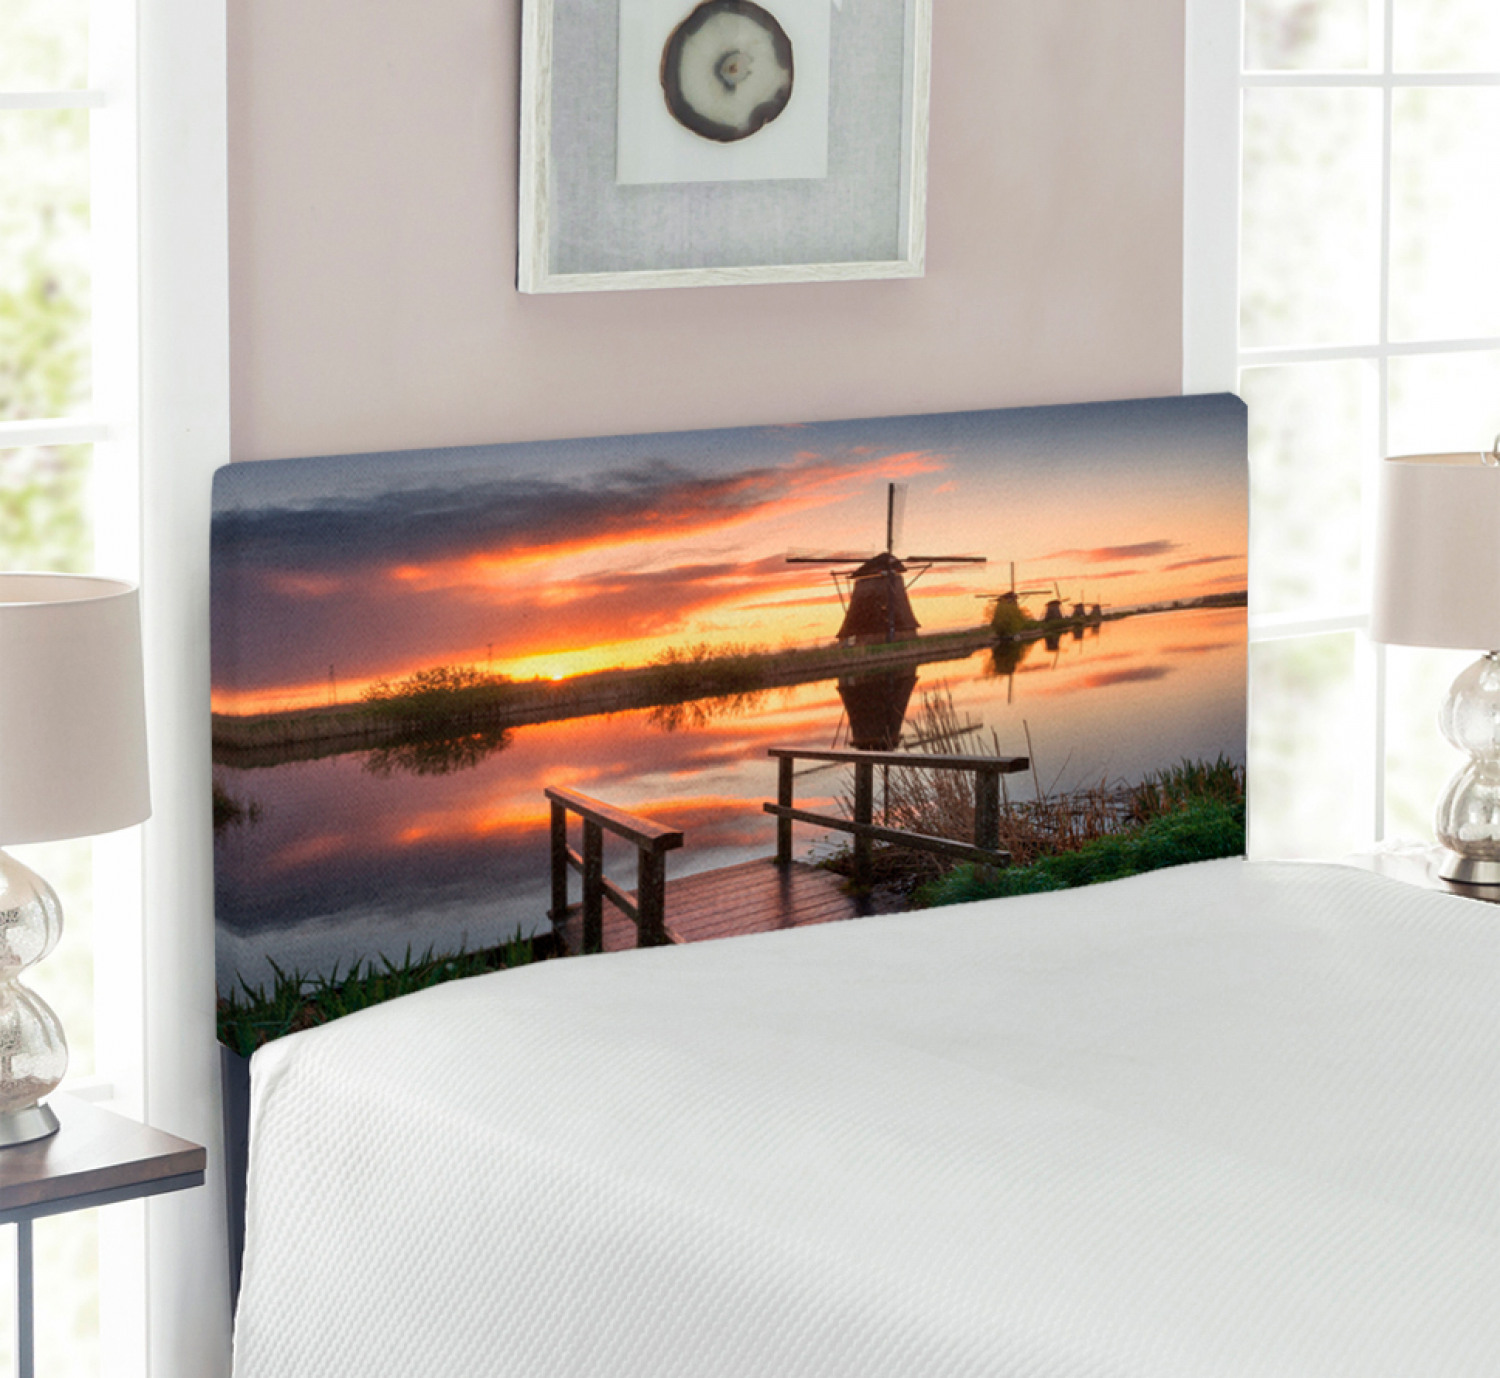 Nature Headboard, Landscape with Traditional Famous Dutch Windmills on Background near Canal Photo, Upholstered Decorative Metal Bed Headboard with Memory Foam, Twin Size, Orange Blue, by Ambesonne - image 2 of 4